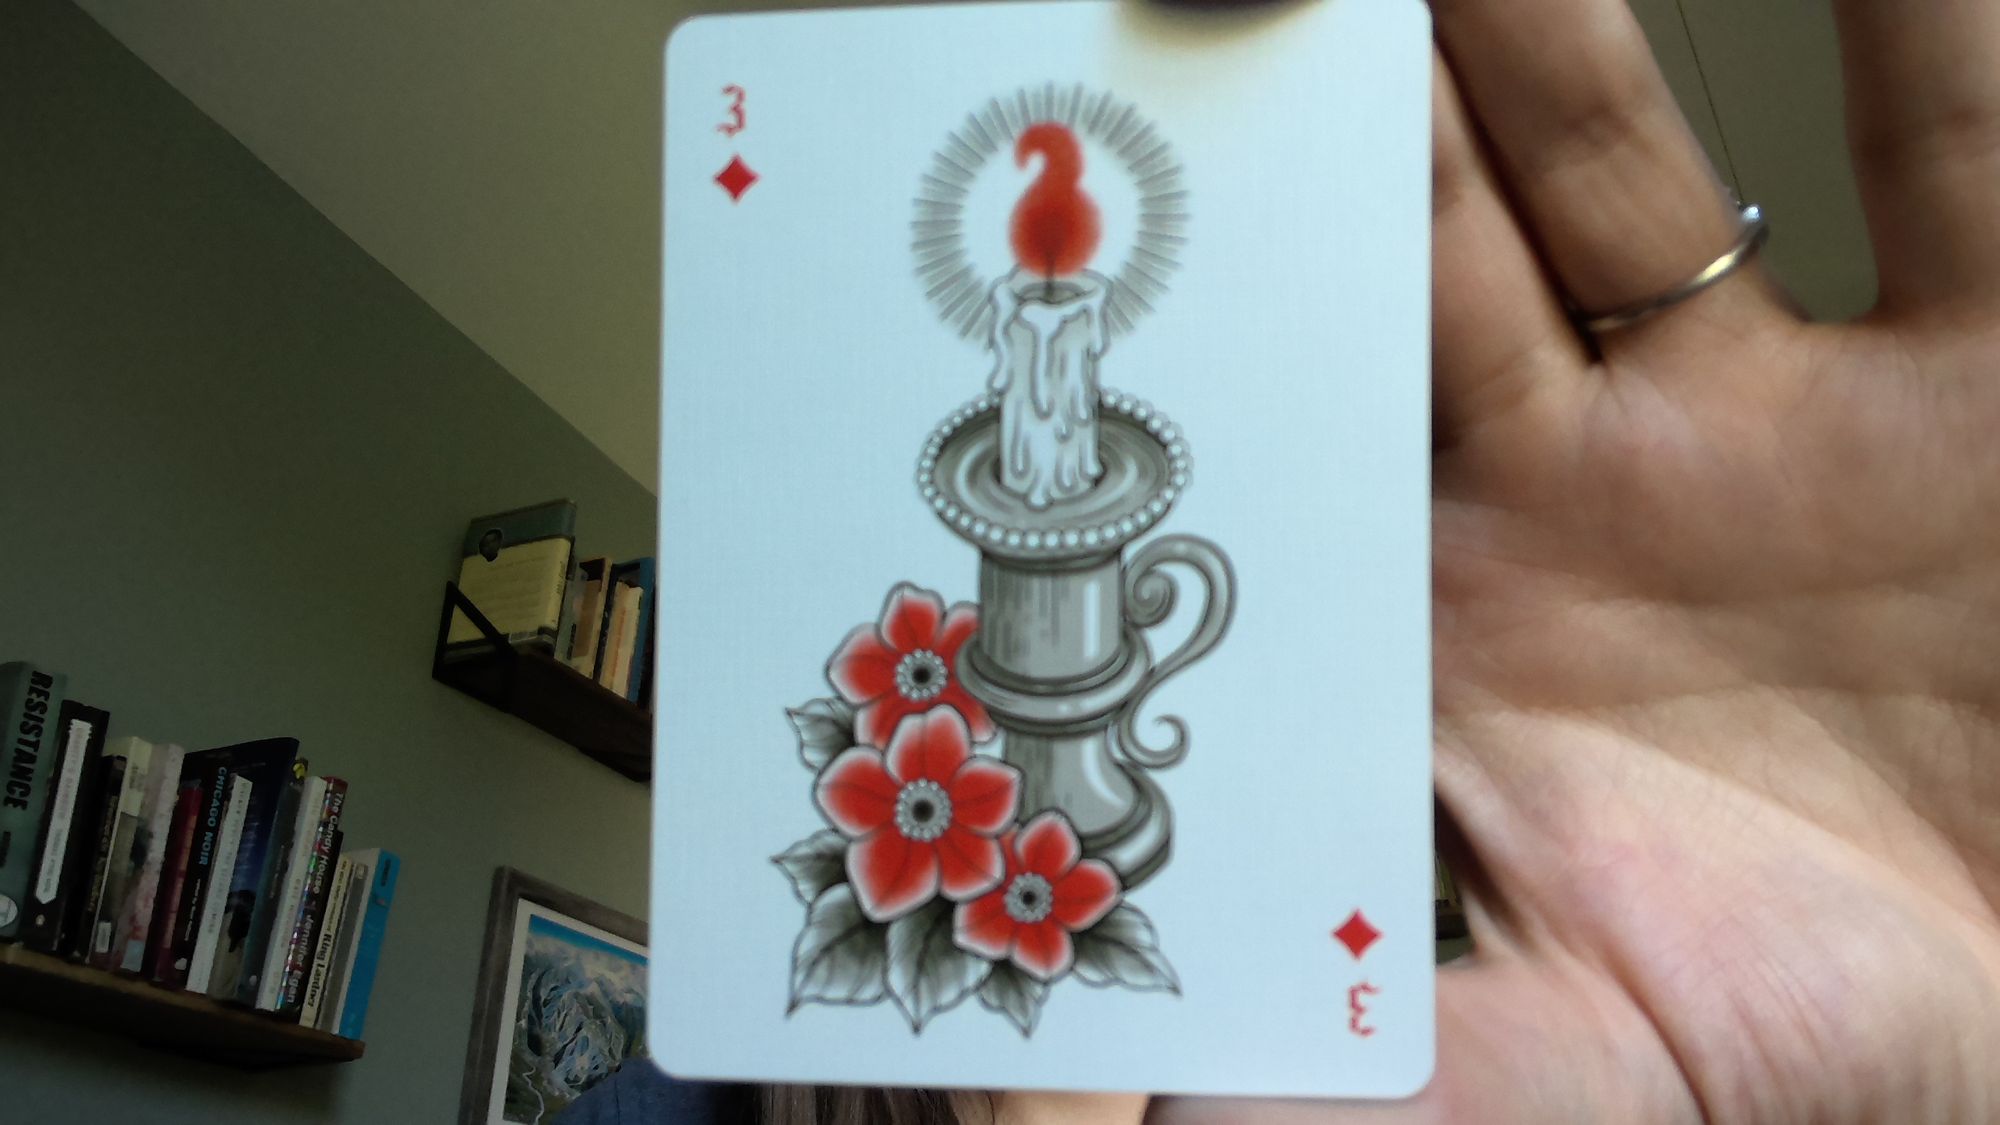 3 of Diamonds from the Bloom deck by Laura Marcuet